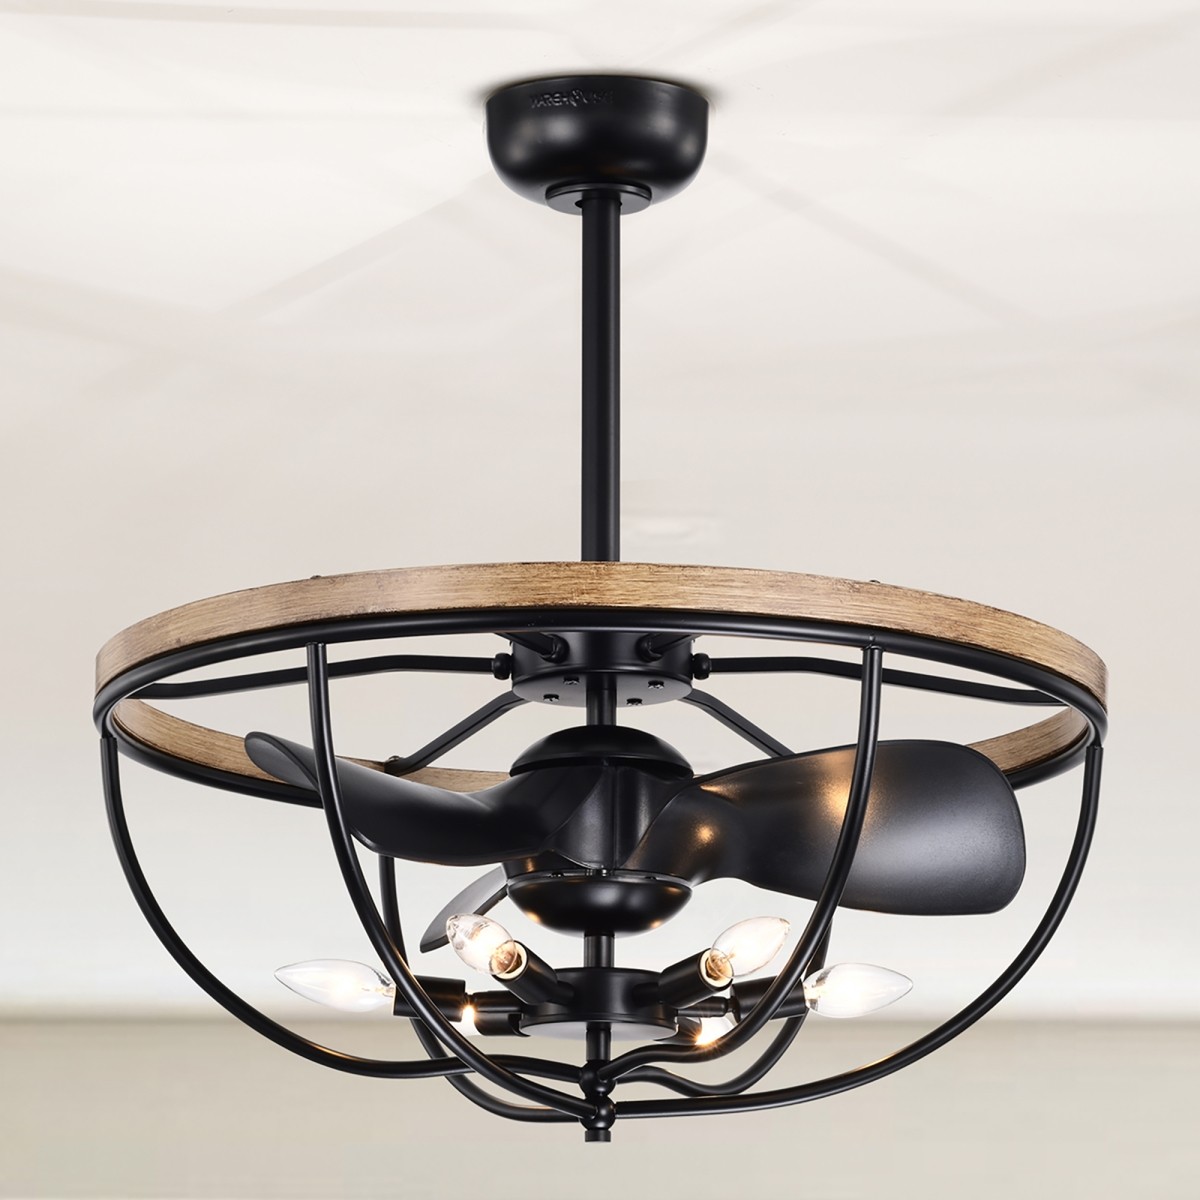 Adeline 26 in. 6-Light Indoor Matte Black Finish Ceiling Fan with Light Kit and Remote